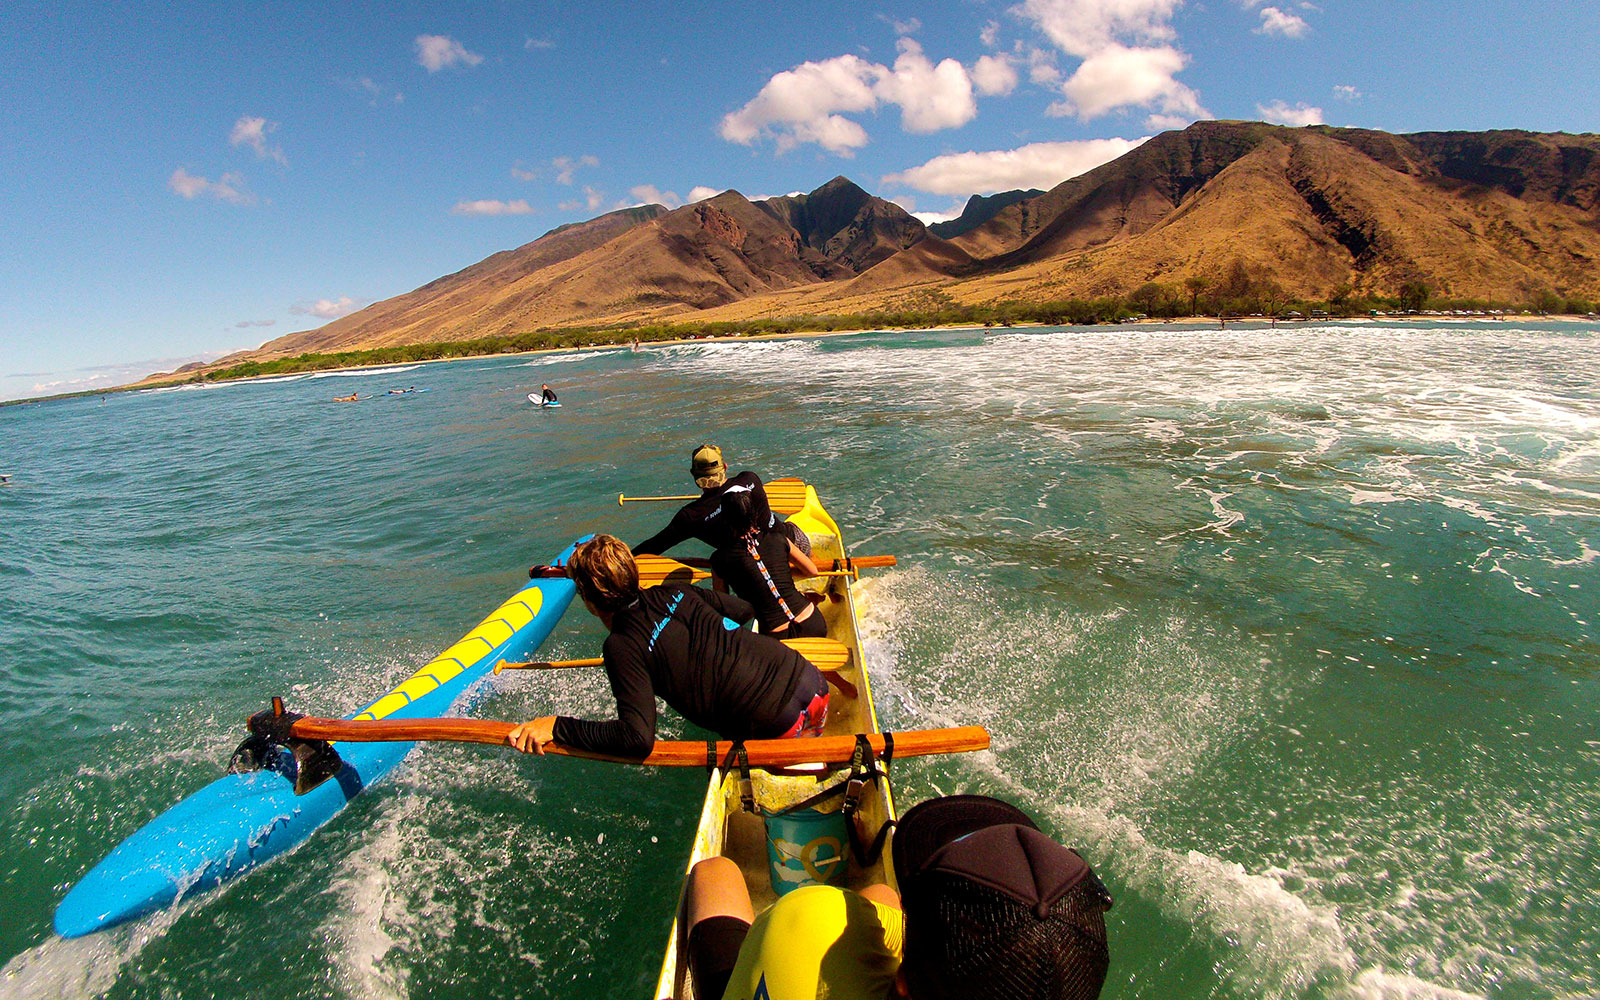 In Maui, Surfing the Waves in an Outrigger Canoe 